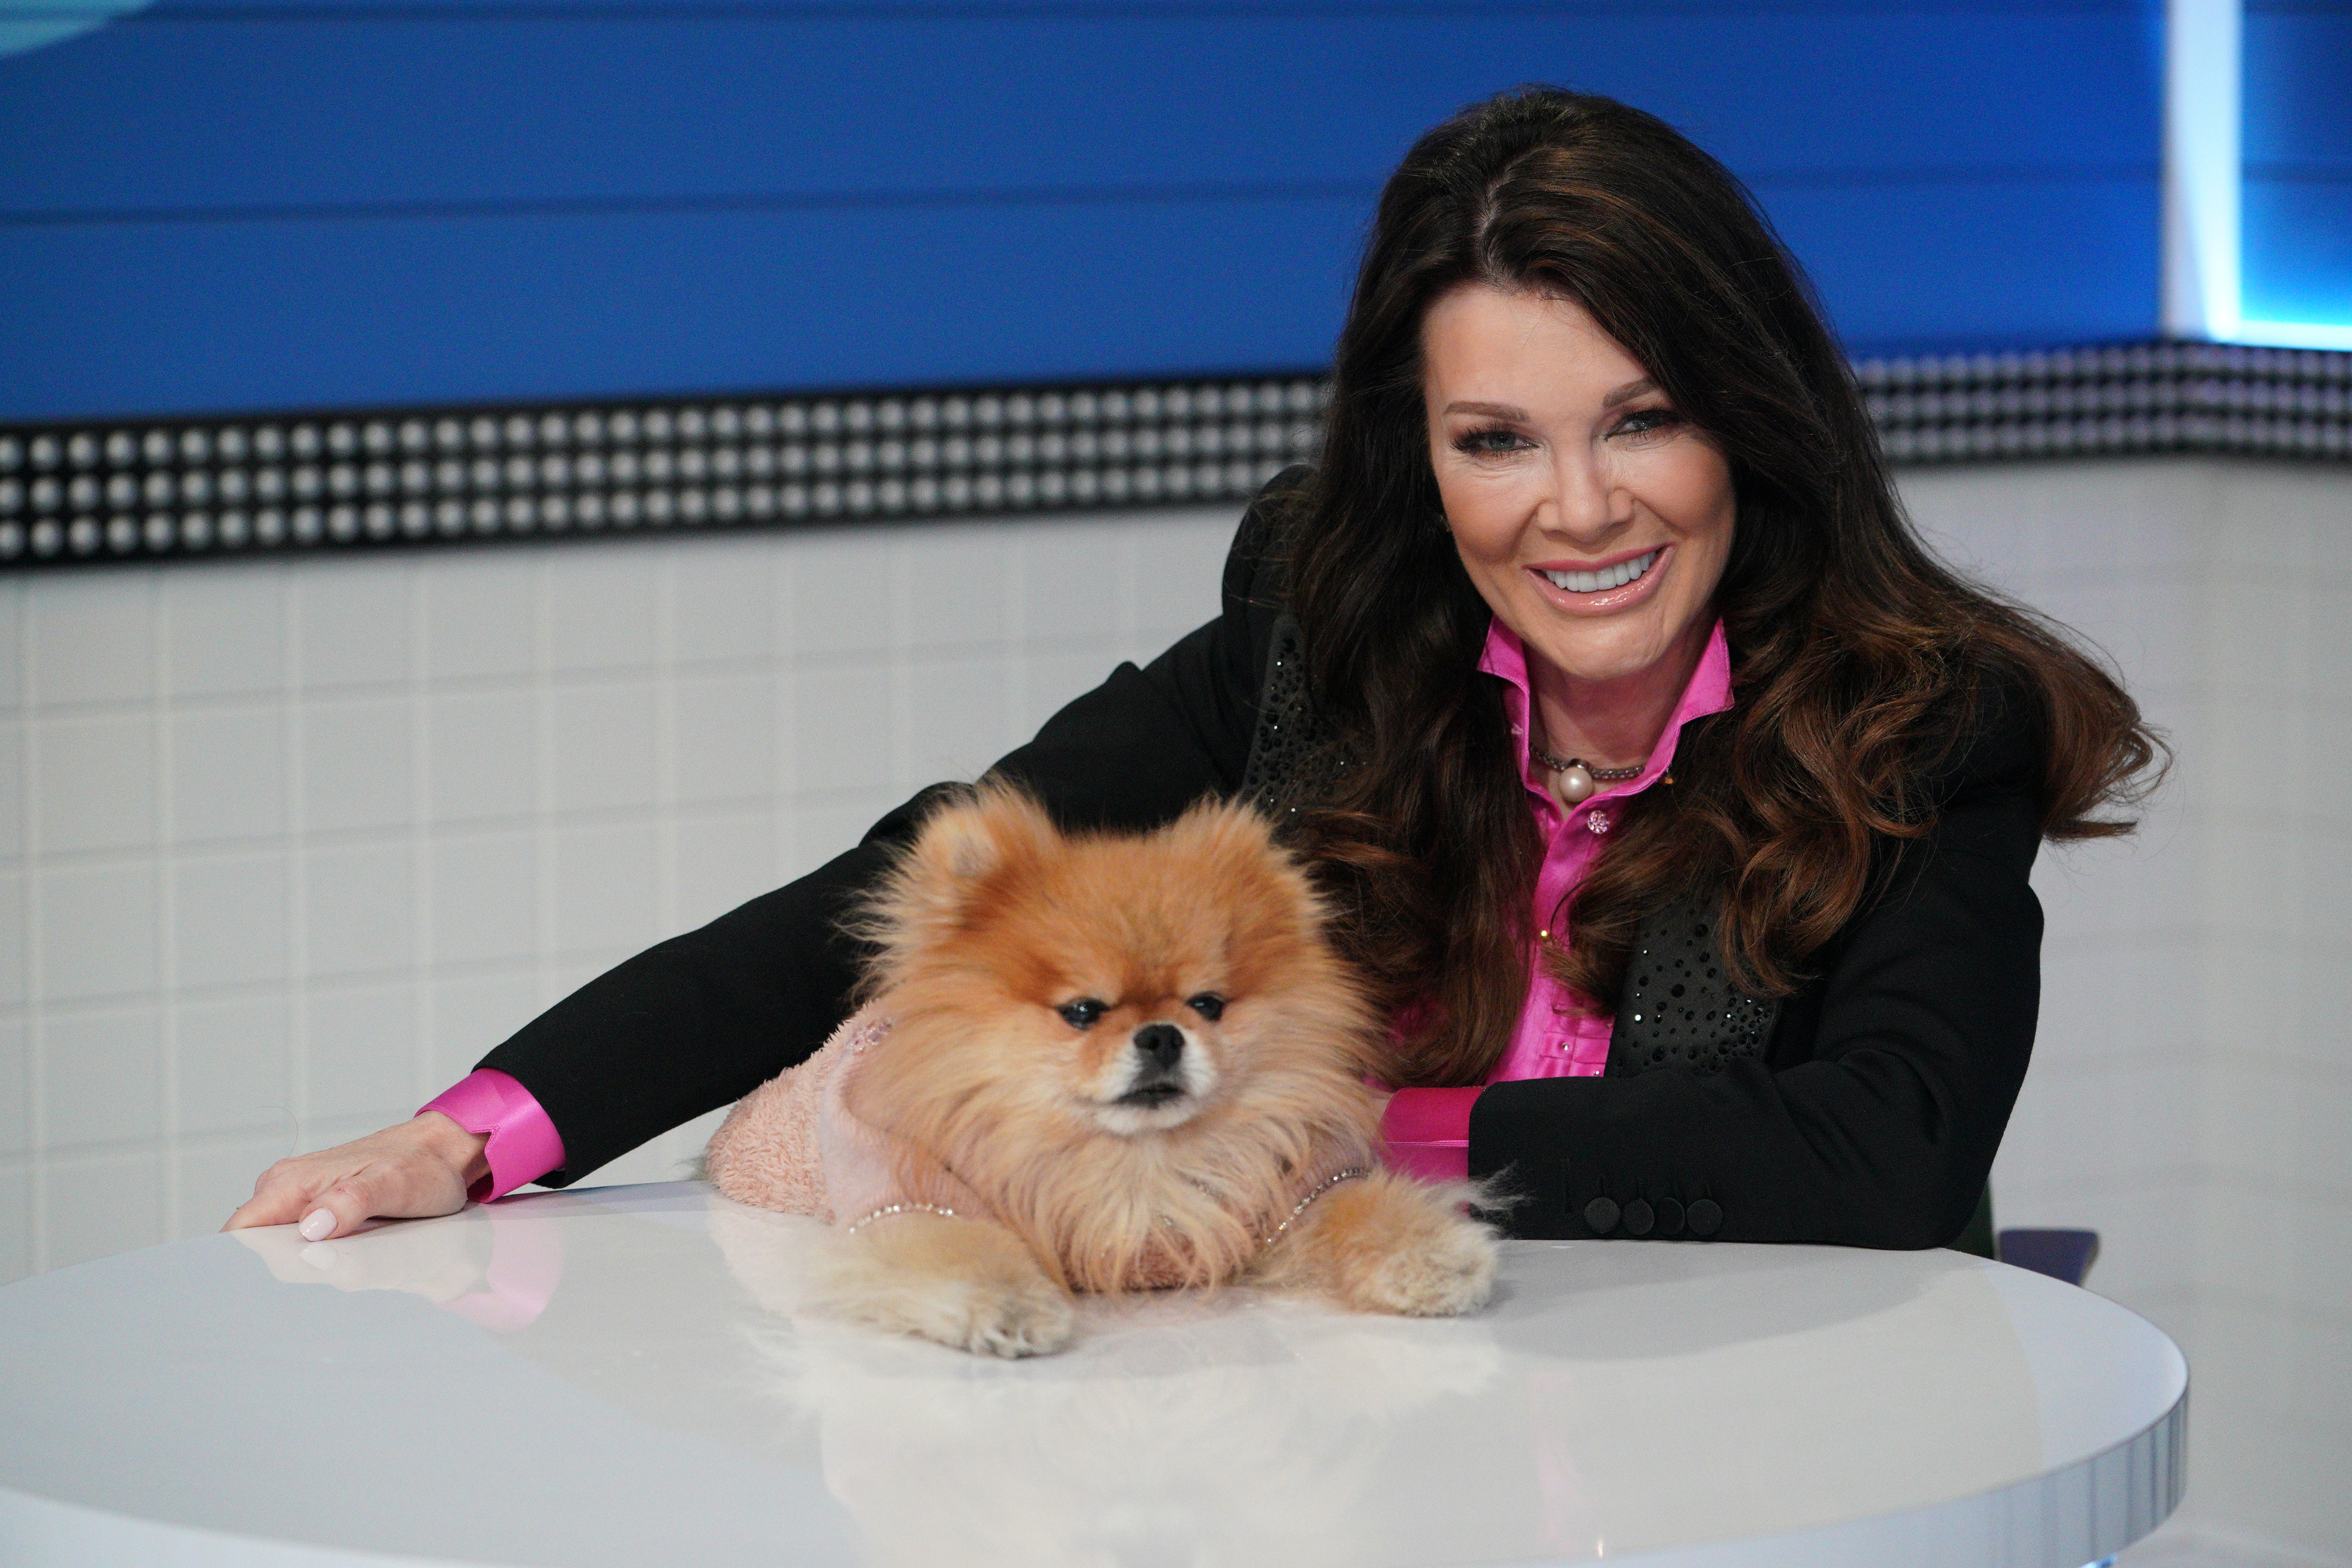 Lisa Vanderpump Ready to Leave 'Housewives' But One Thing Stopping Her